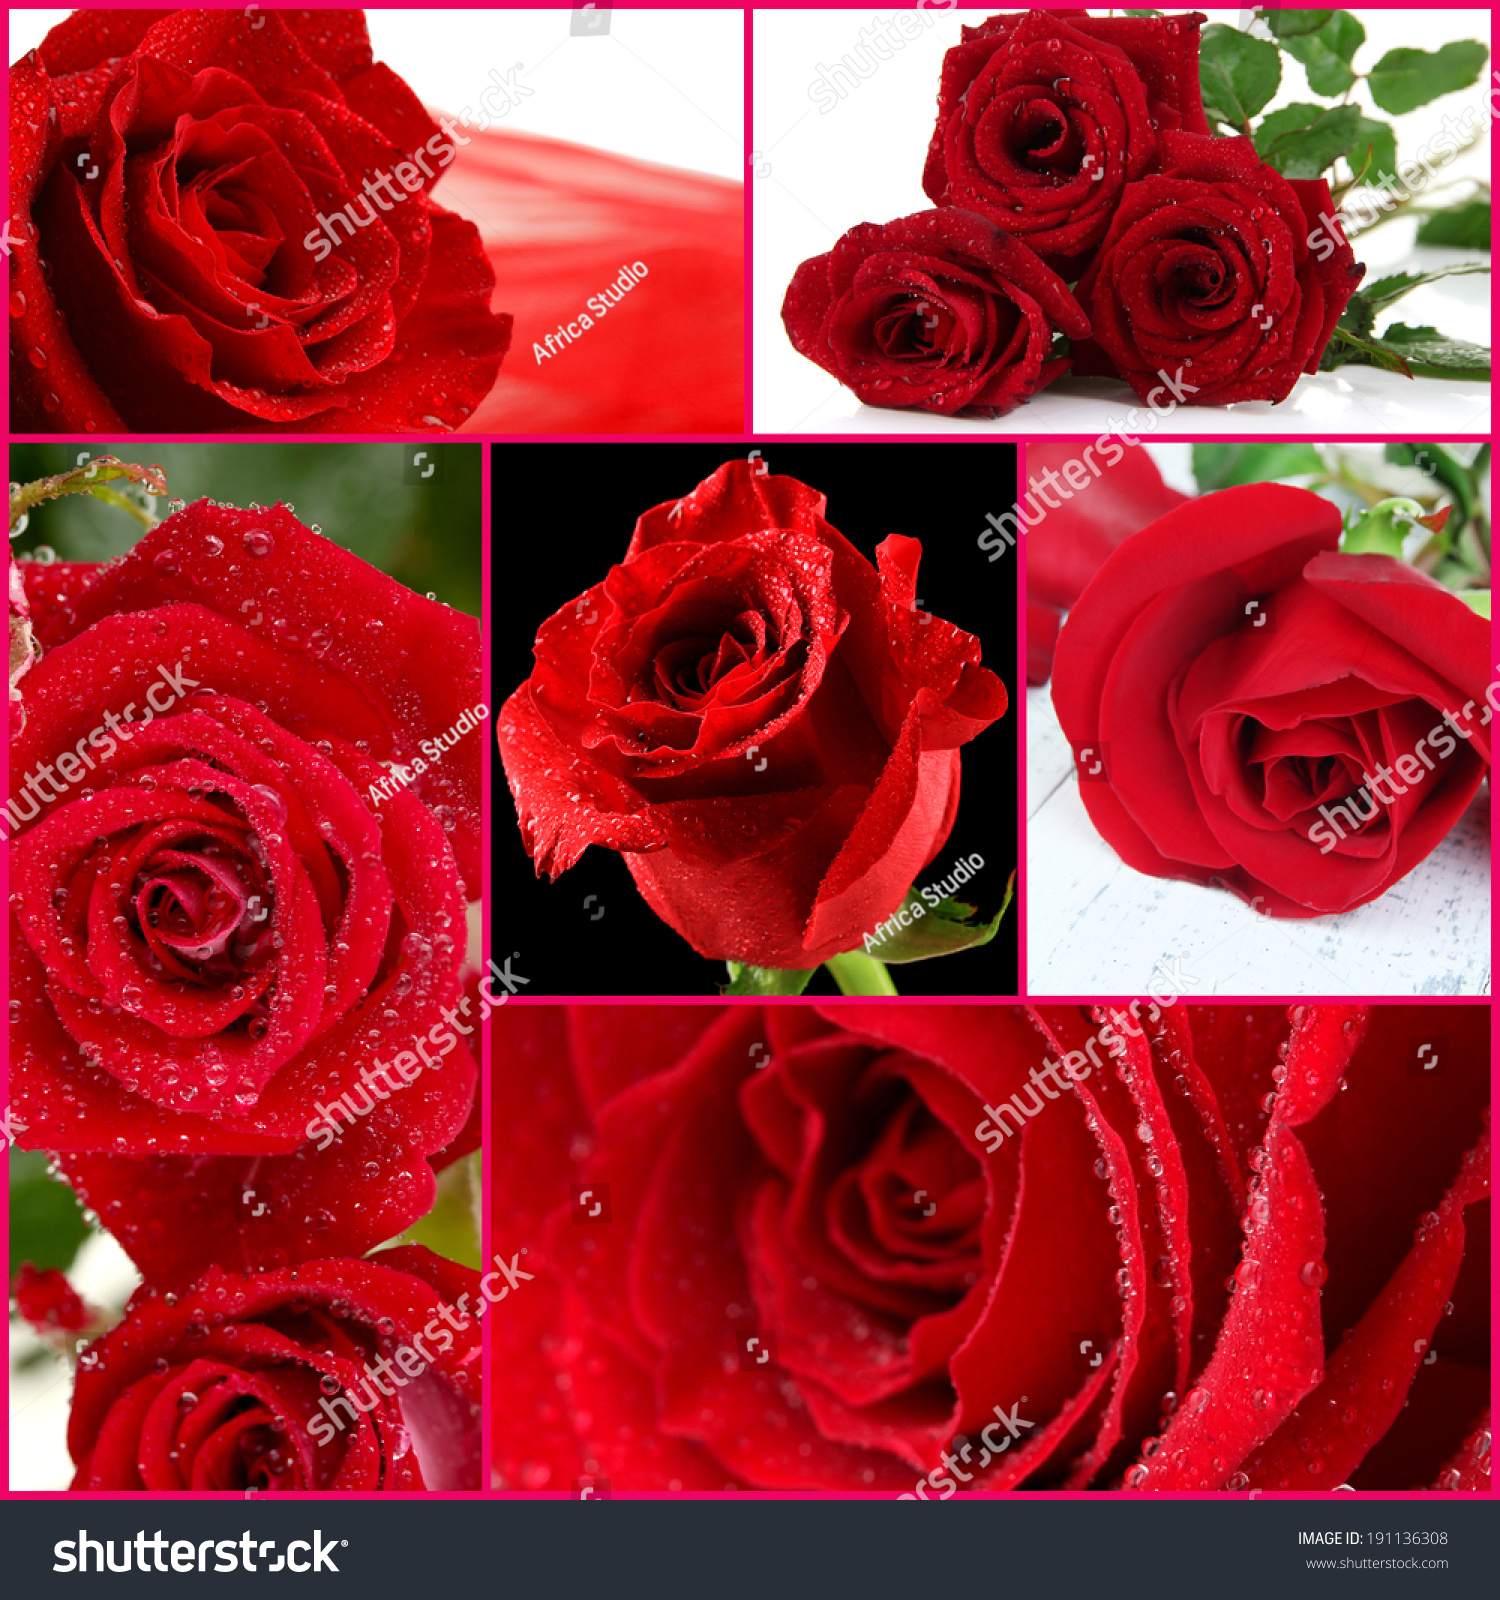 Beautiful Roses Collage Close Stock Photo 191136308 - Shutterstock